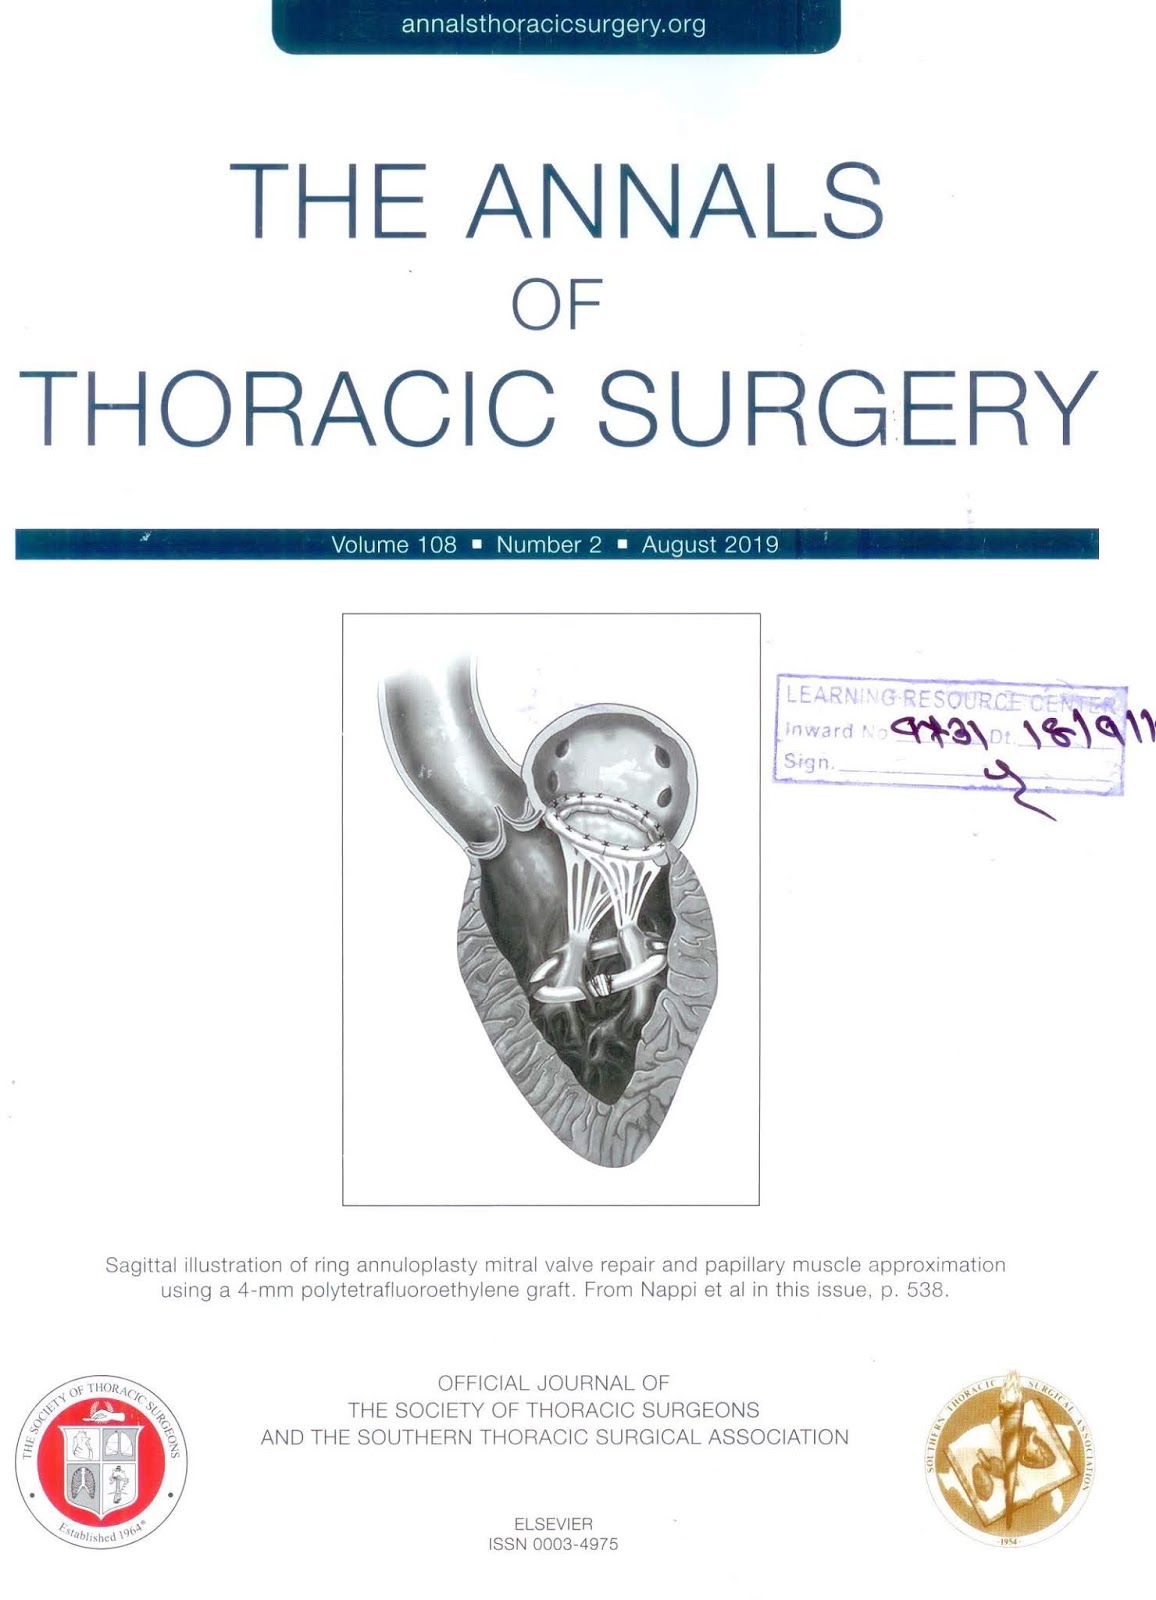 https://www.annalsthoracicsurgery.org/issue/S0003-4975(18)X0019-8